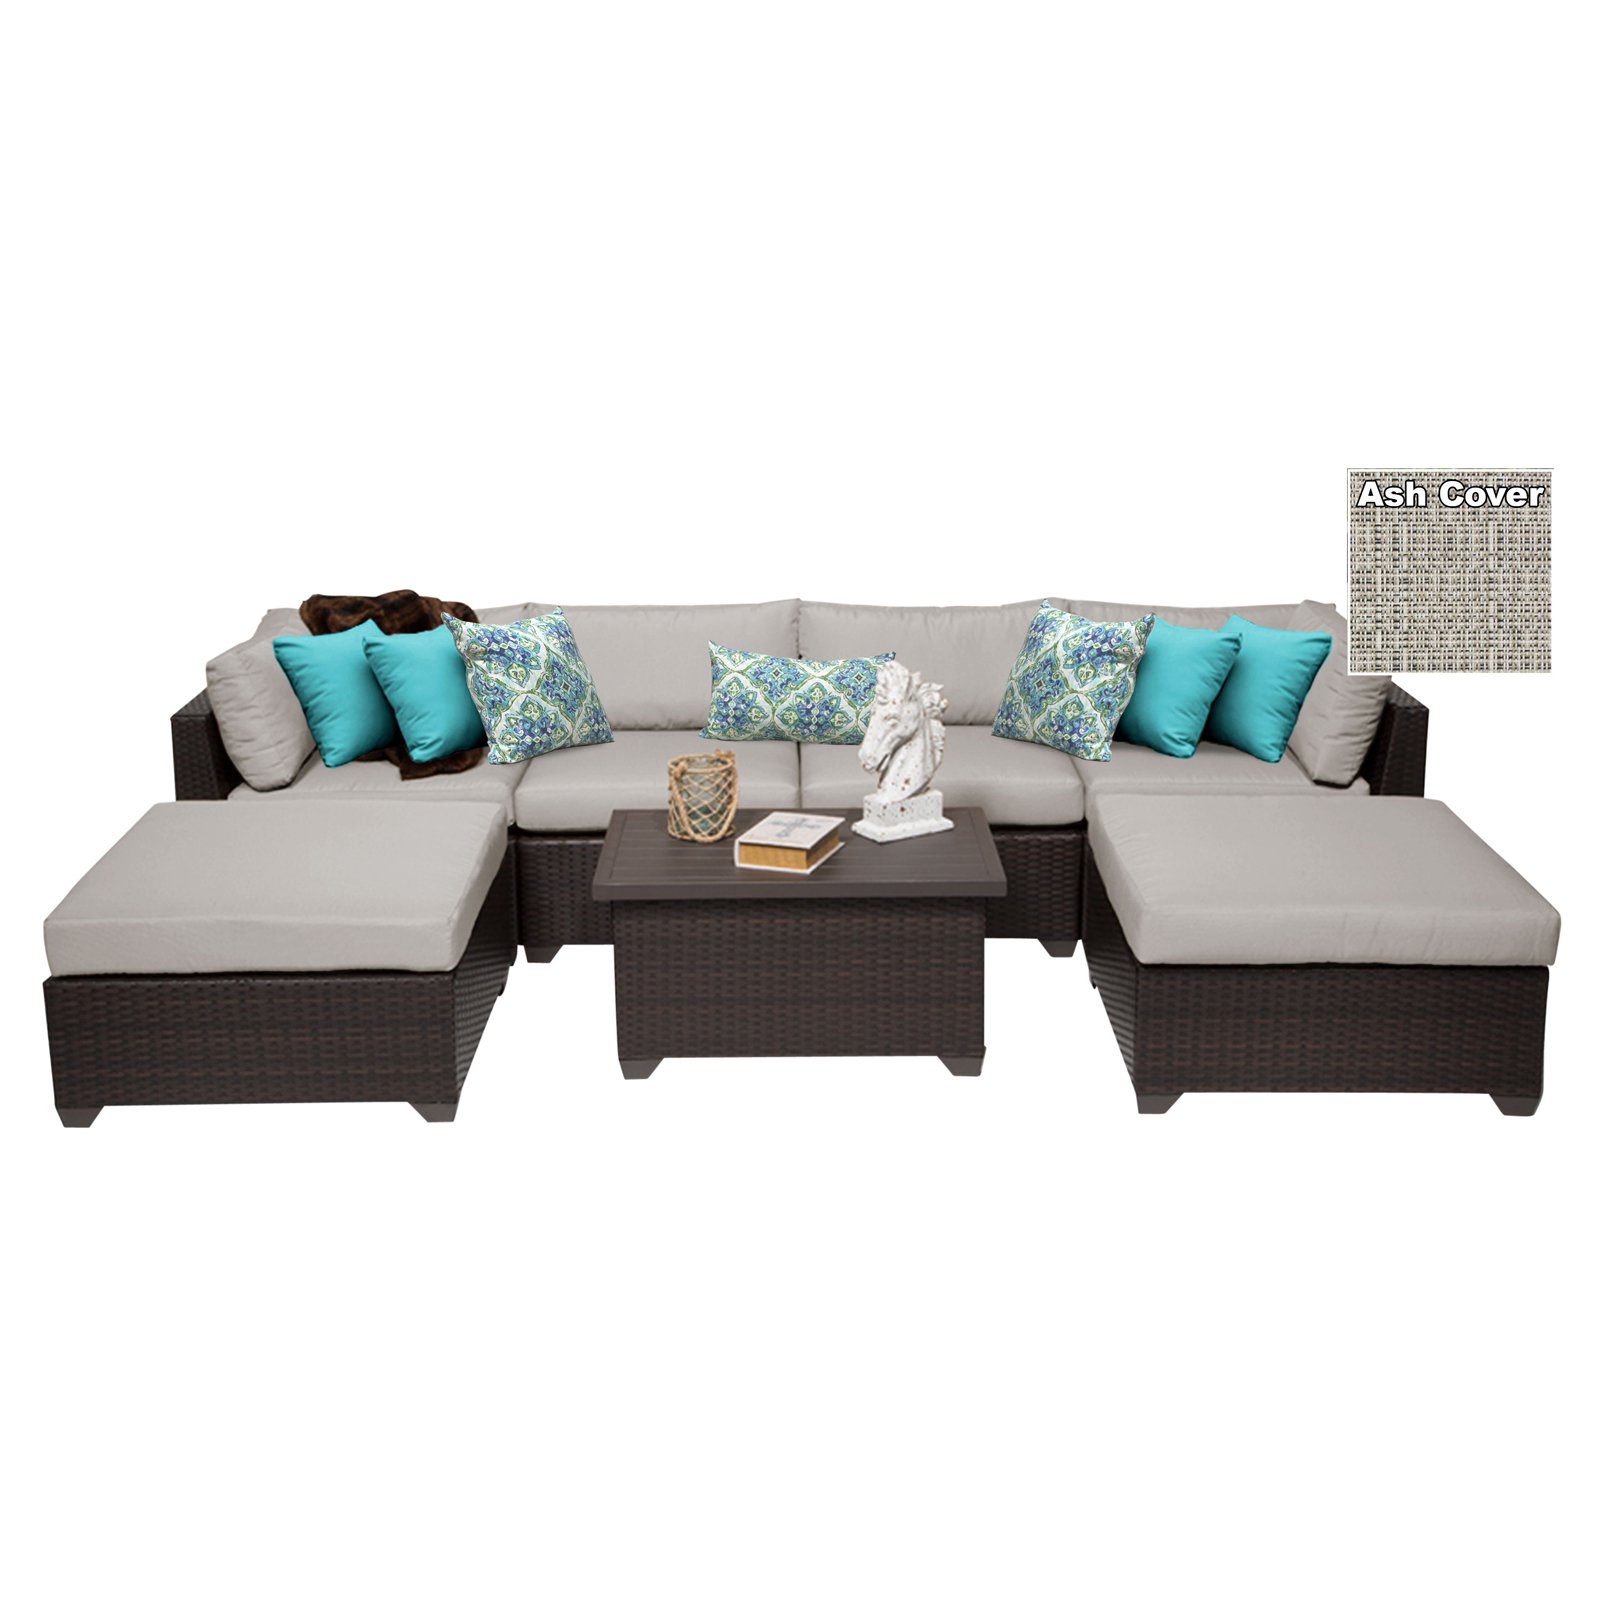 TK Classics Belle Wicker 7 Piece Patio Conversation Set with Ottoman and 2 Sets of Cushion Covers - image 1 of 2